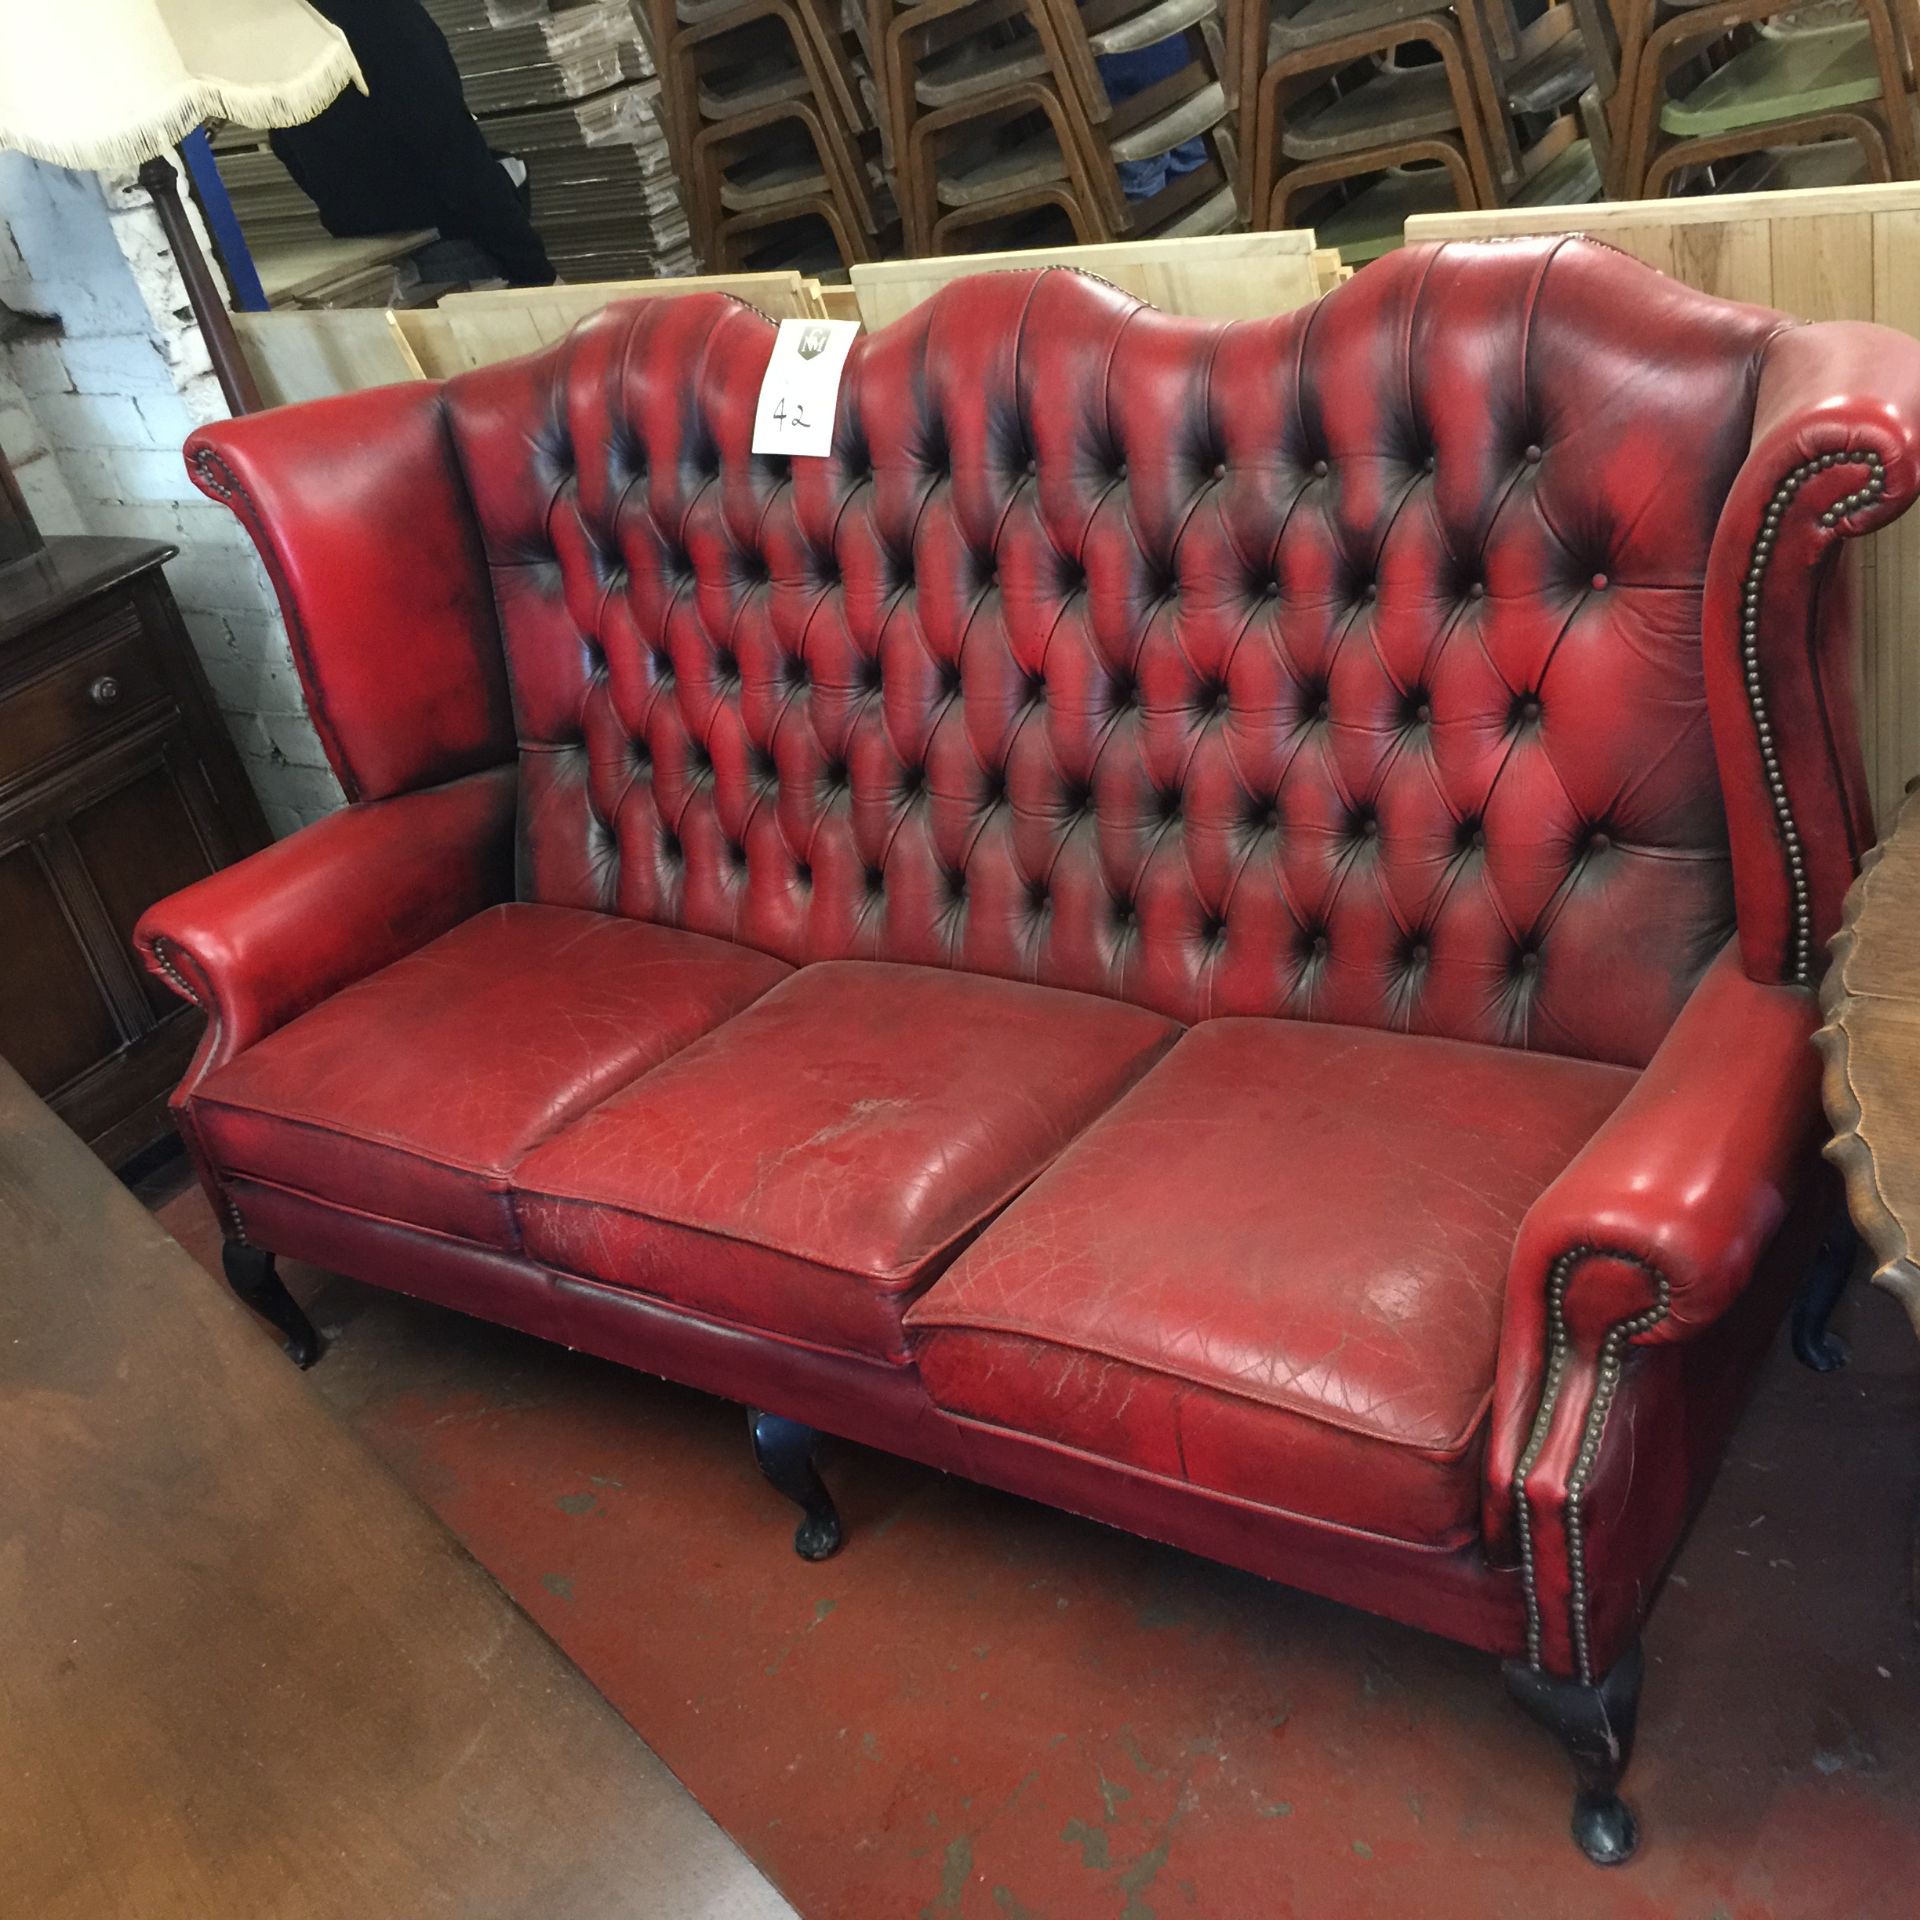 Chesterfield 3 Seater Sofa, Queen Anne legs, high backed and winged.  Slightly worn seat which adds - Image 2 of 2